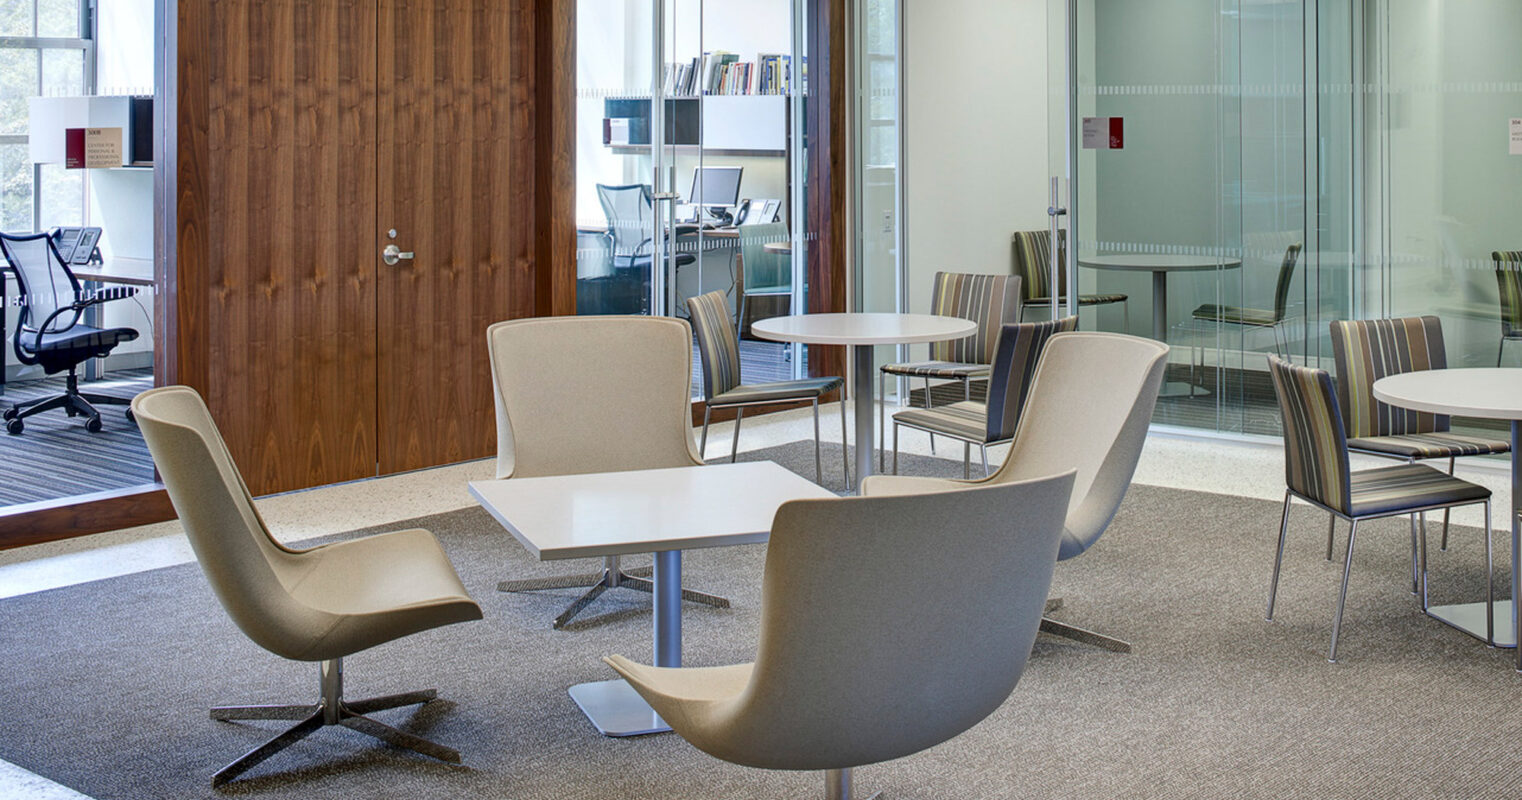 Modern office space featuring neutral tones with sleek, taupe armchairs, a textured gray area rug, wood grain doors, and frosted glass partitions promoting a light, airy atmosphere conducive to collaboration.